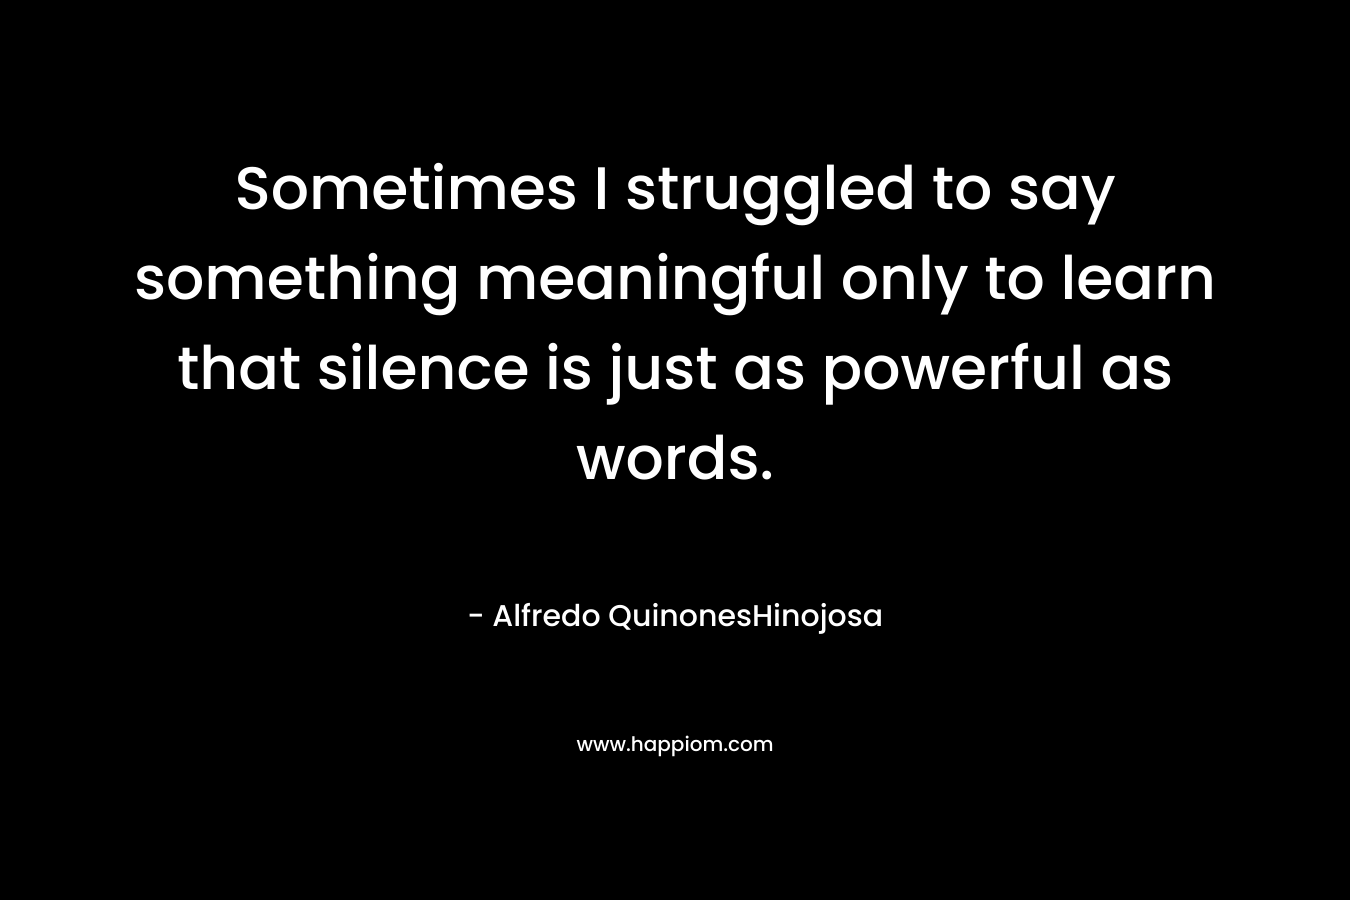 Sometimes I struggled to say something meaningful only to learn that silence is just as powerful as words.